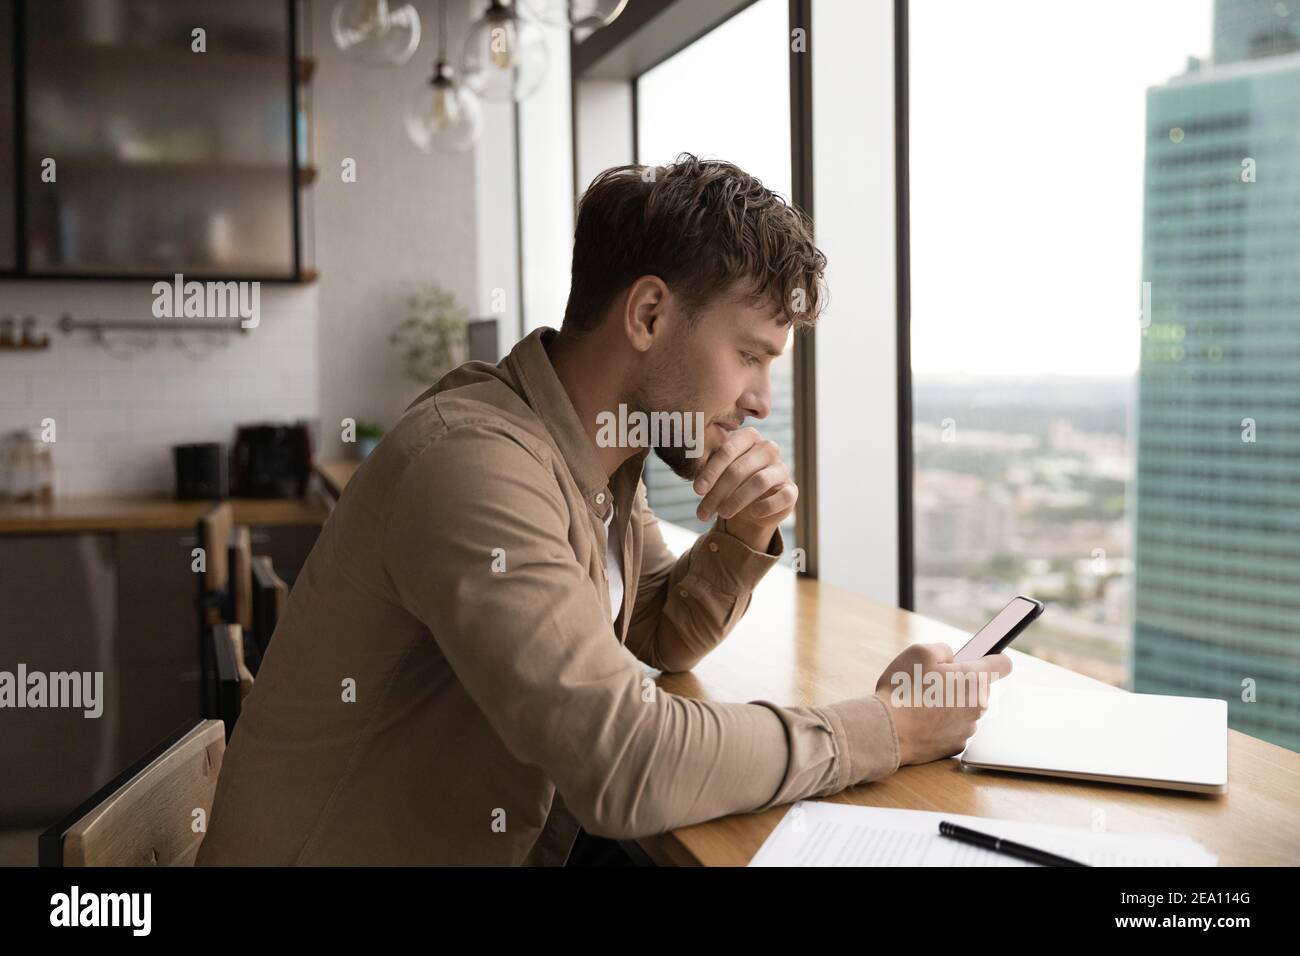 Businessman sit by window at kitchen read message on phone Stock Photo